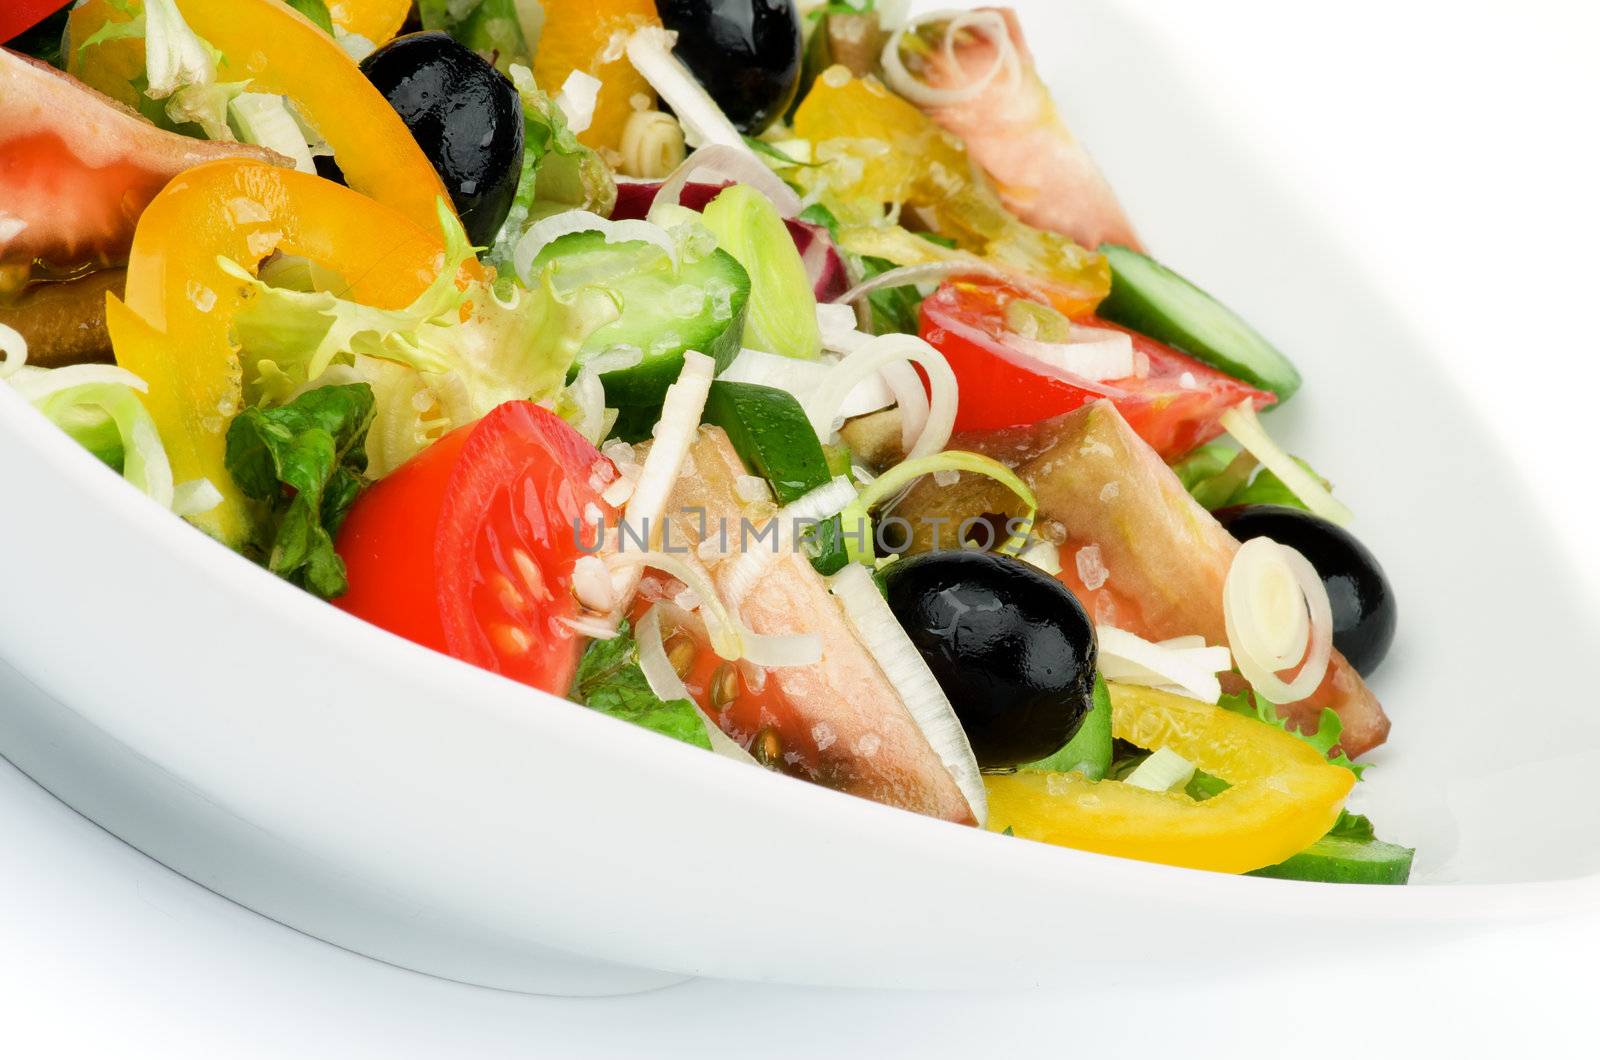 Vegetable Salad with Tomatoes, Yellow Bell Pepper, Leek, Black Olive, Cucumber, Lettuce and Olive Oil in White Bowl closeup